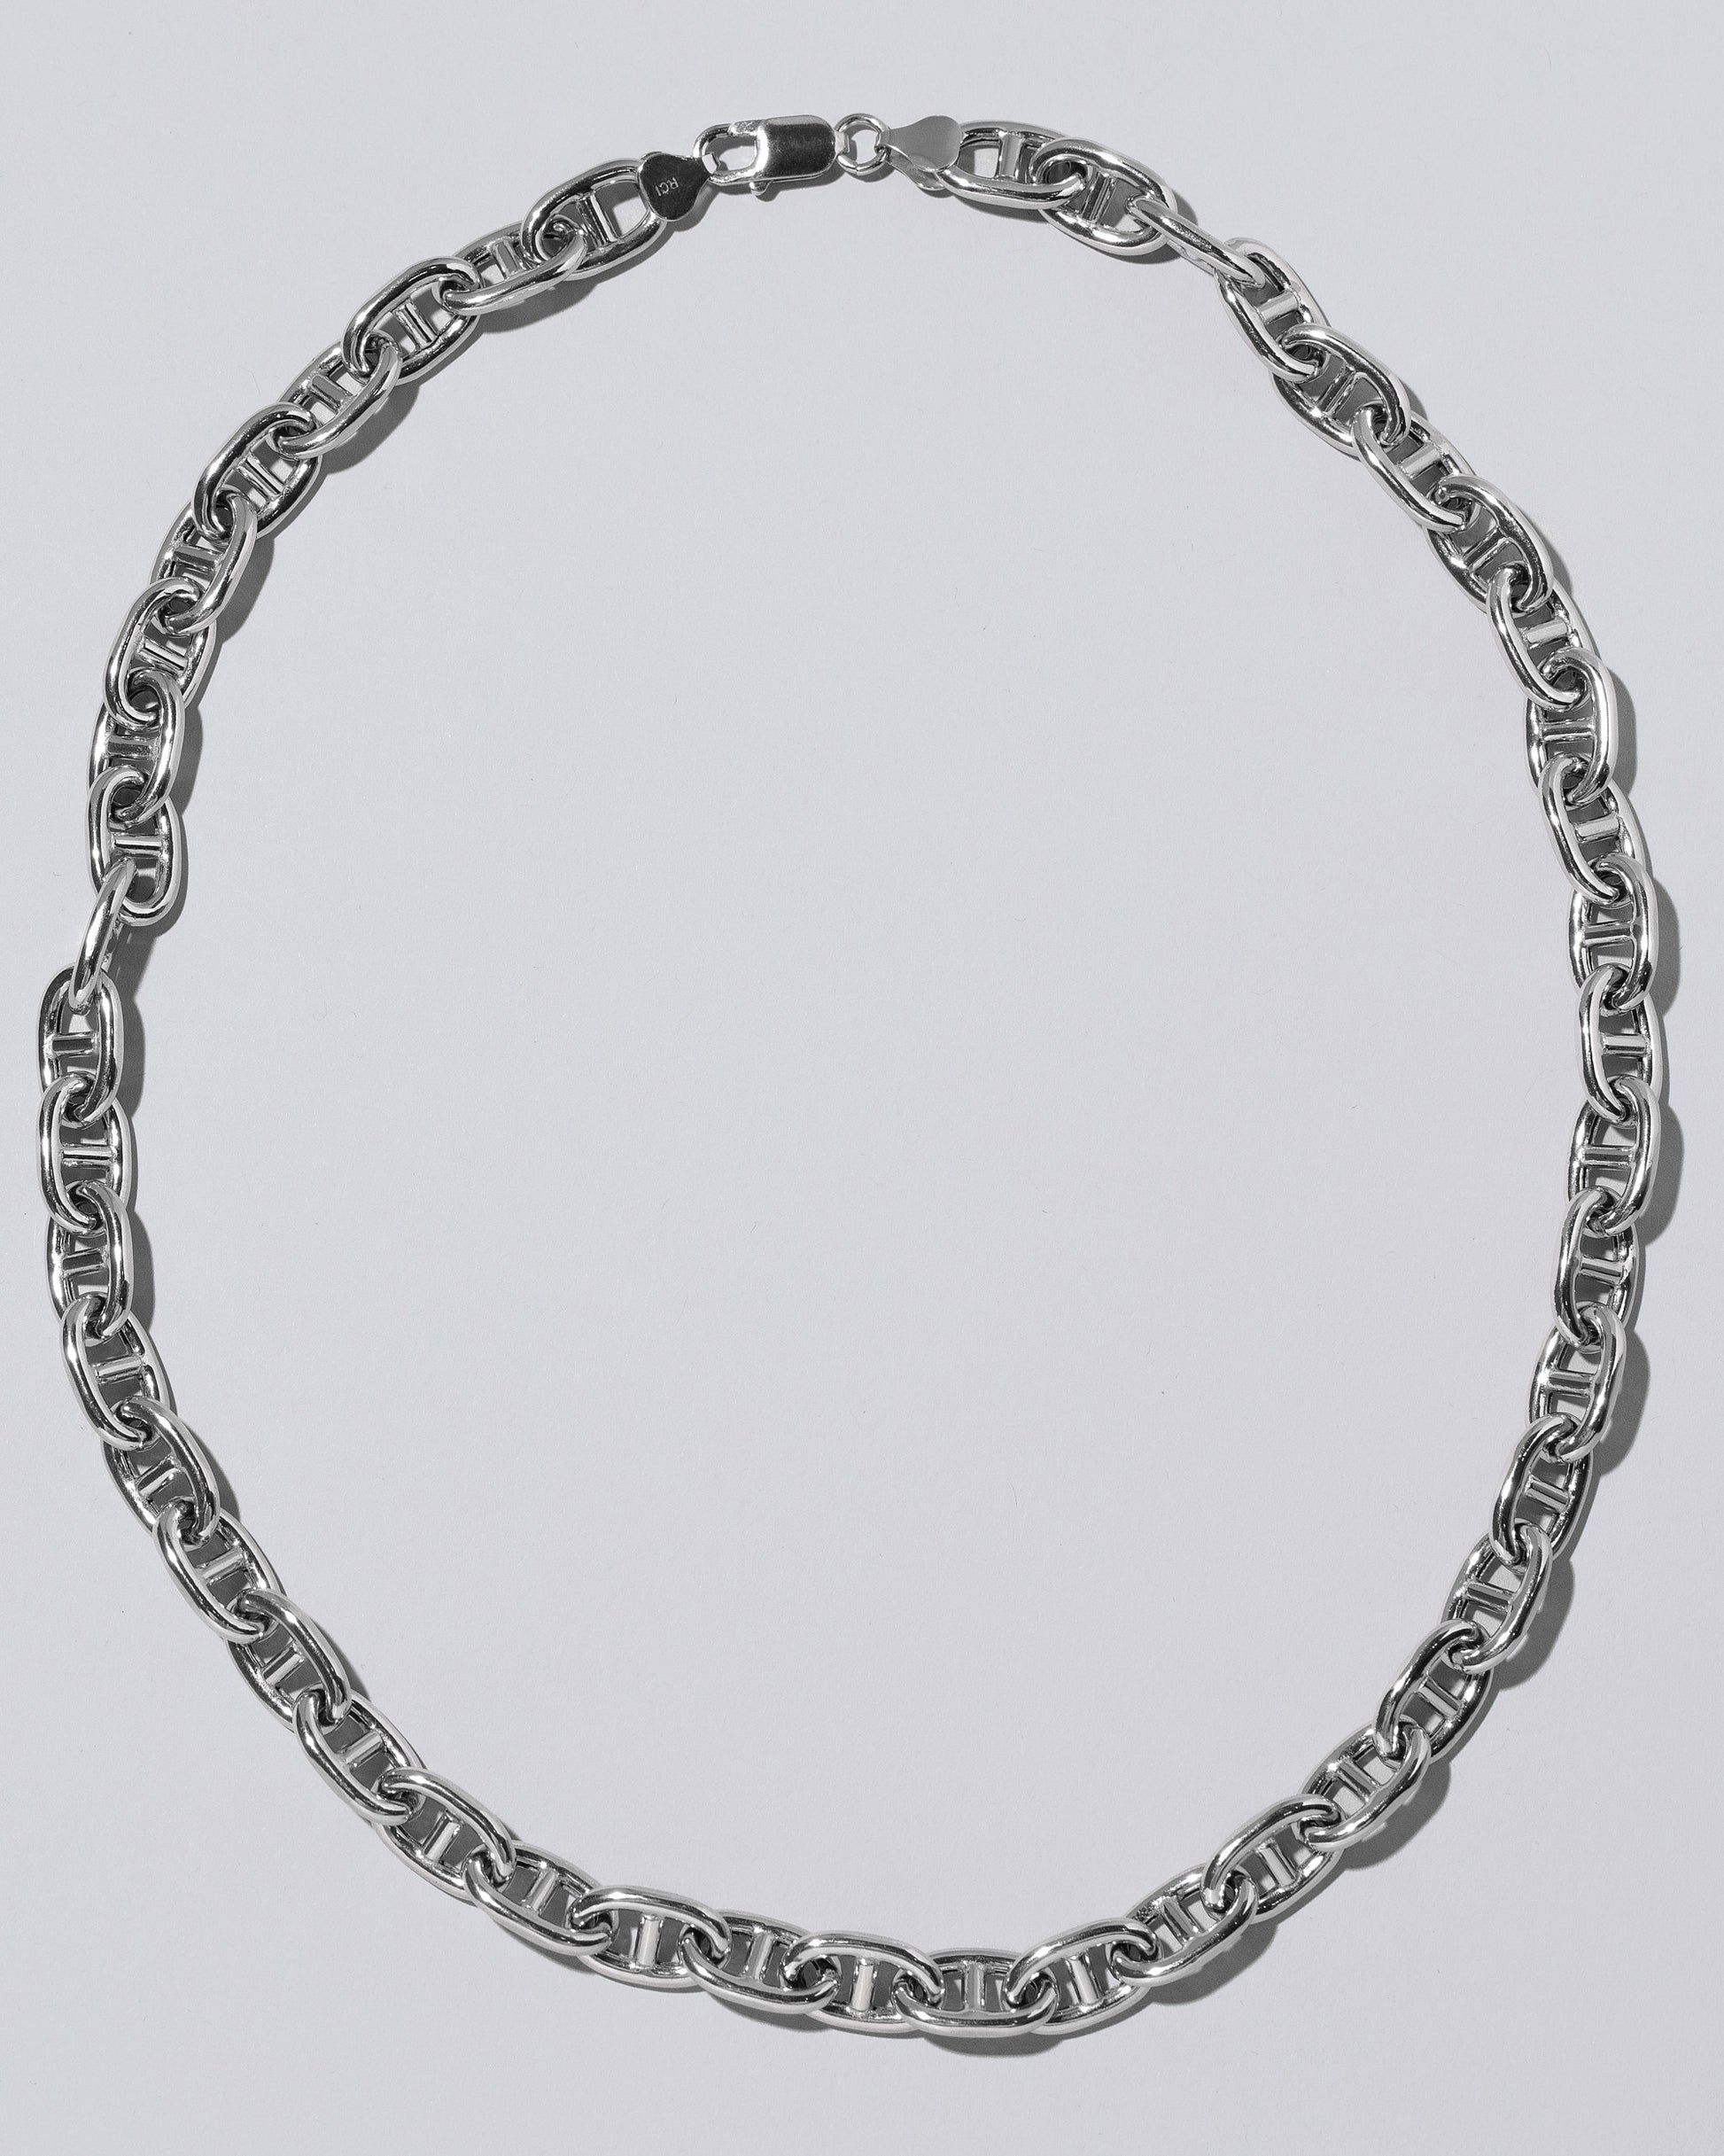 Silver Lite Anchor Chain on light color background.